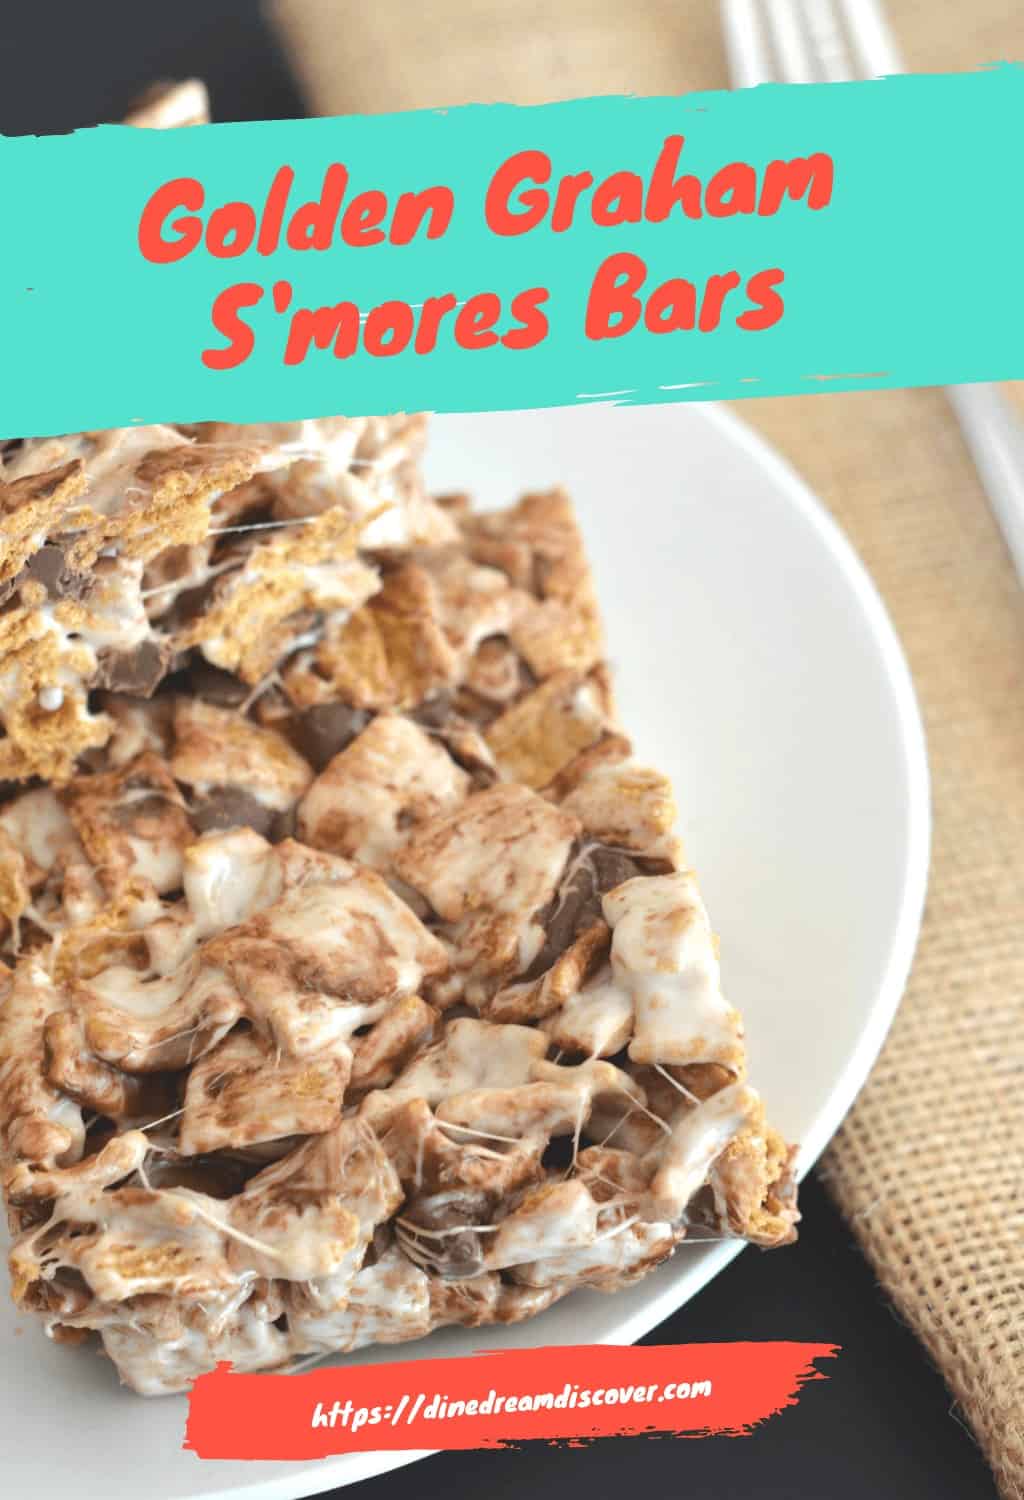 Bringing all your favorite flavors together with marshmallows, Golden Graham cereal and chocolate chips in this easy with the Golden Graham S'mores Bars recipe.